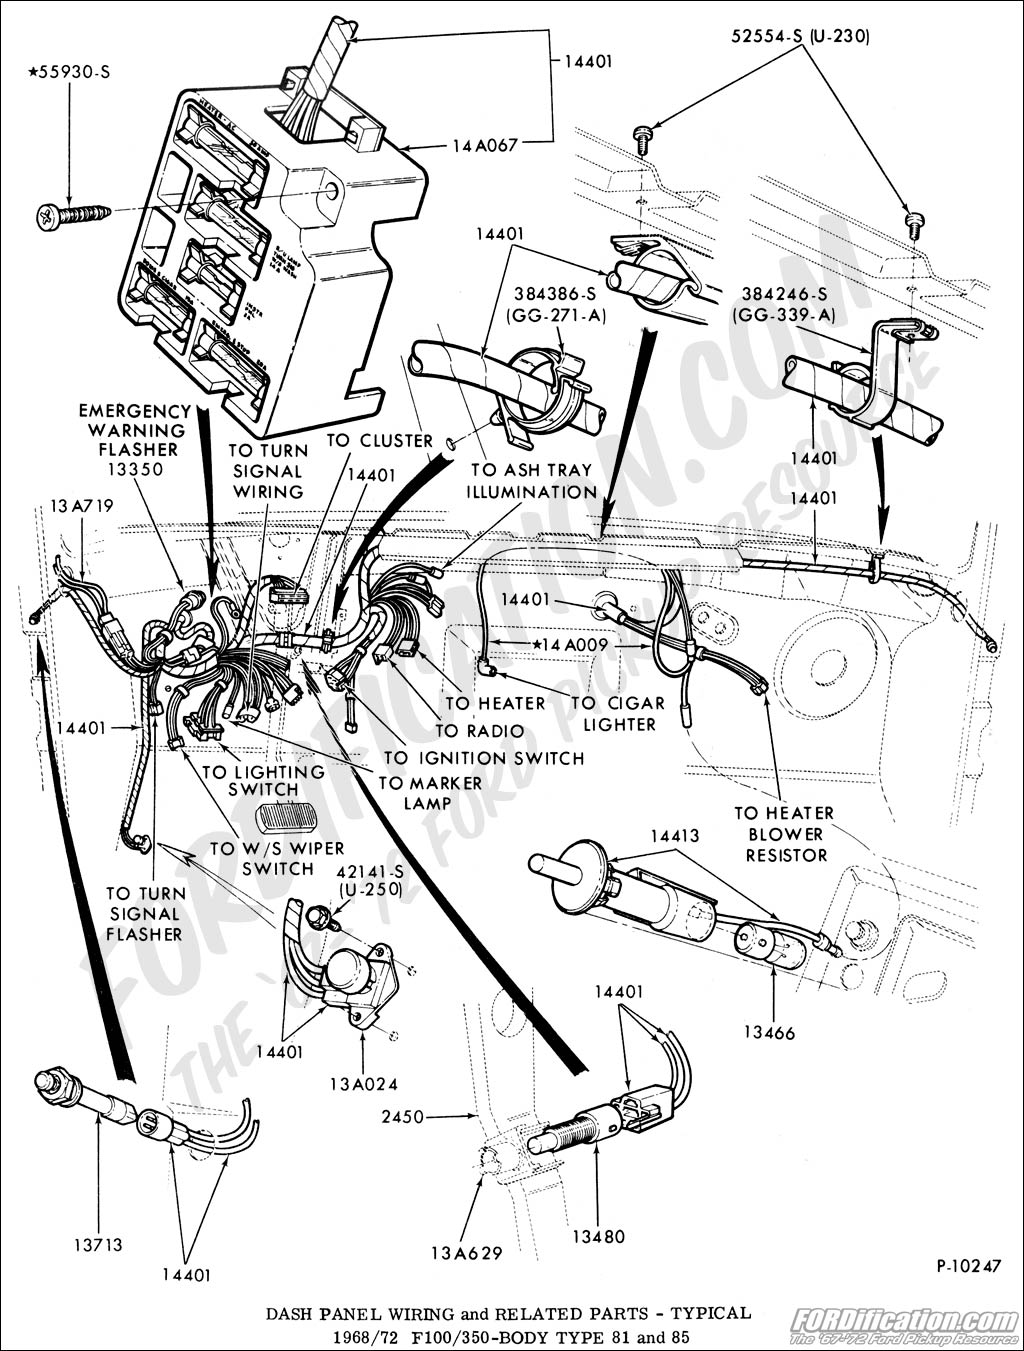 Ford Truck Technical Drawings and Schematics - Section I - Electrical and  Wiring  Repair Manual For 1971 Ford Maverick 250 Engine Wiring Diagram    FORDification.com